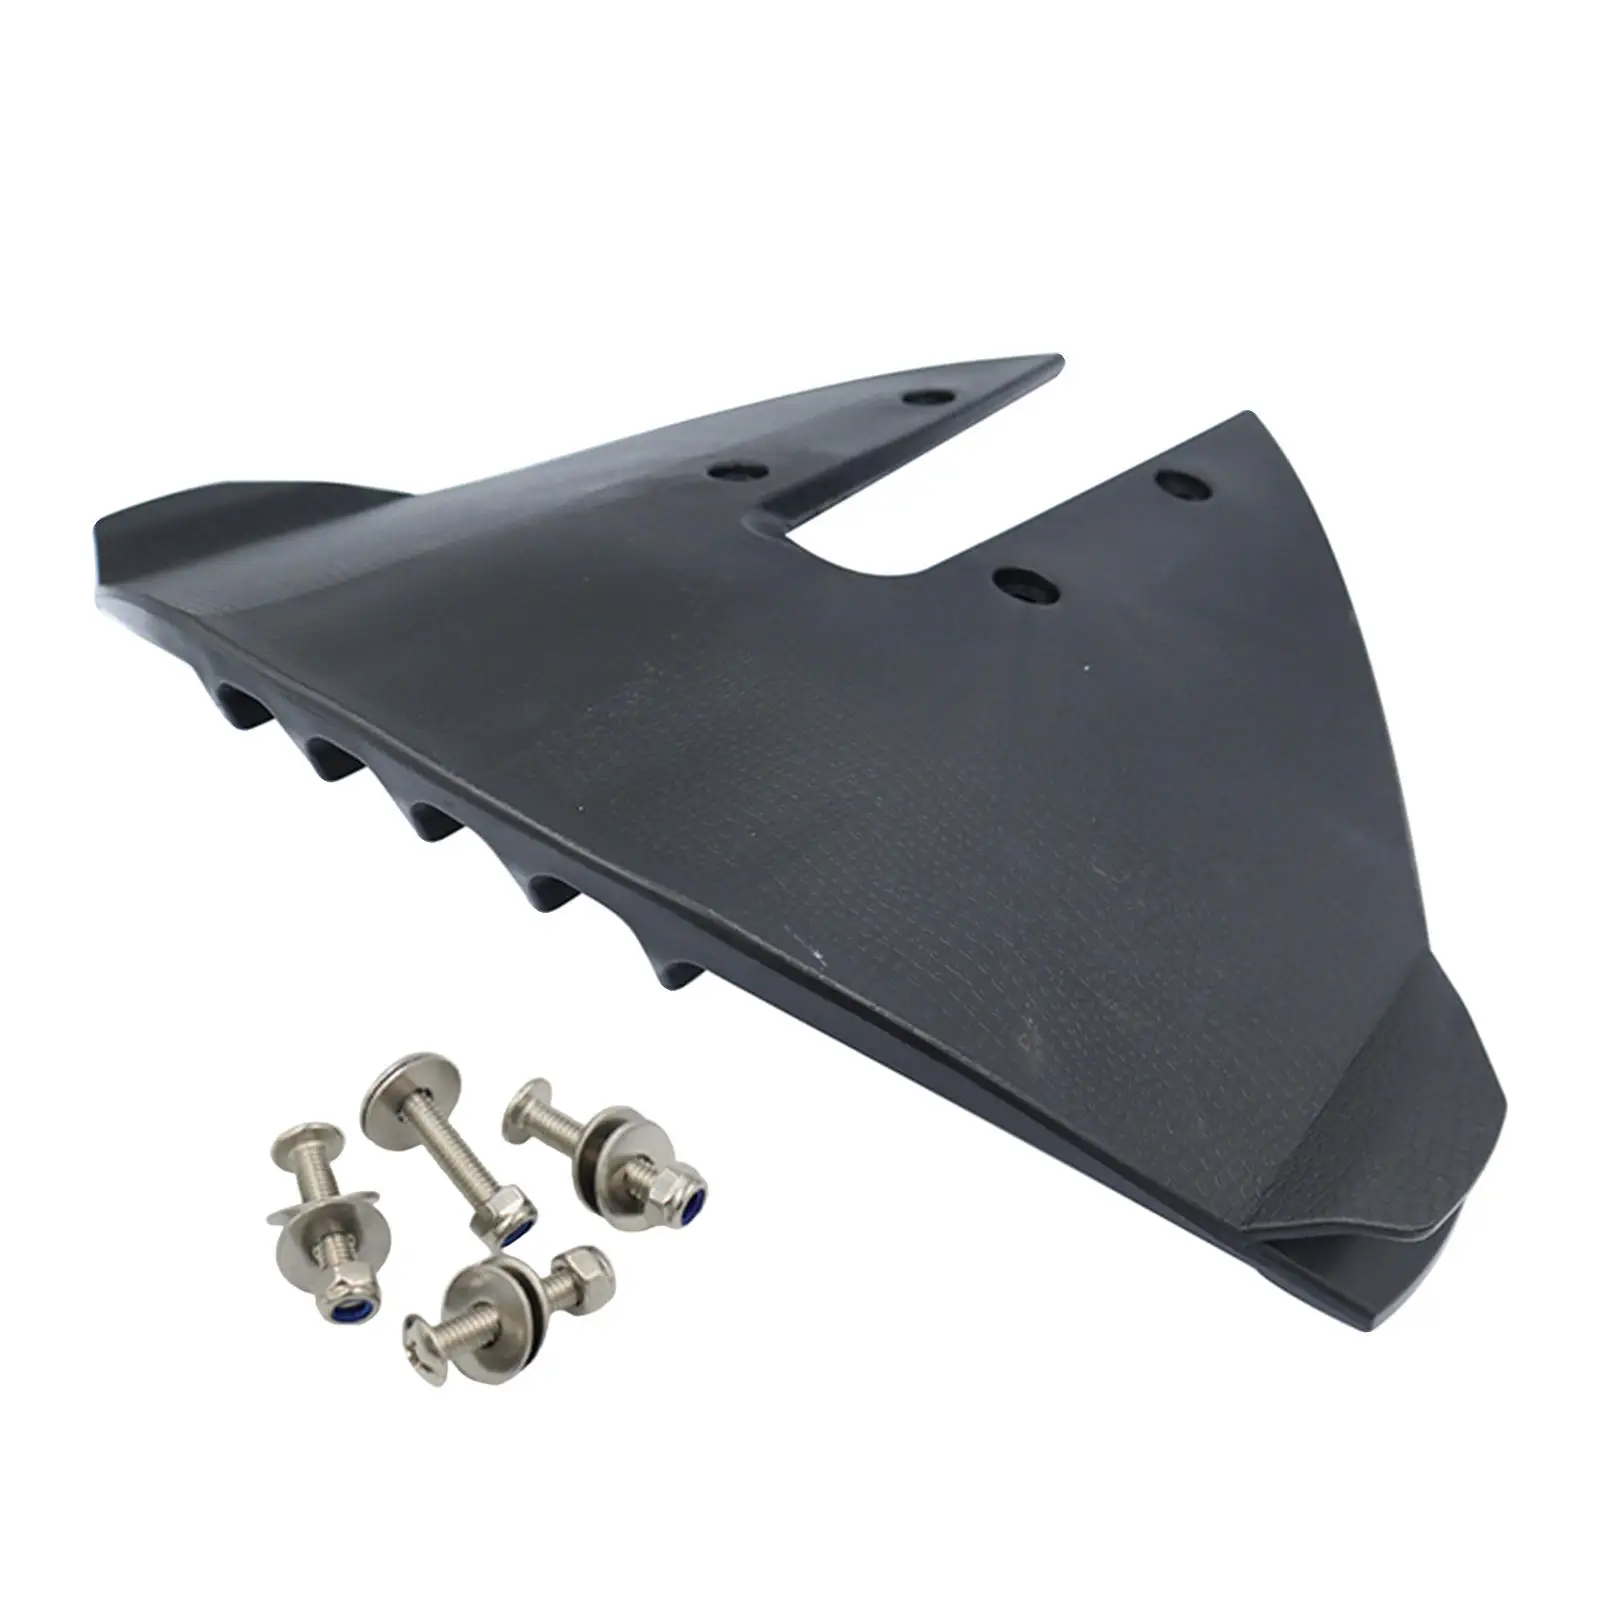 

Hydrofoil Stabilizer Outdrive Hydro Tail Molded Reduces Drag Black Hydro-Stabilizer Fit for Outboard 15-300 HP